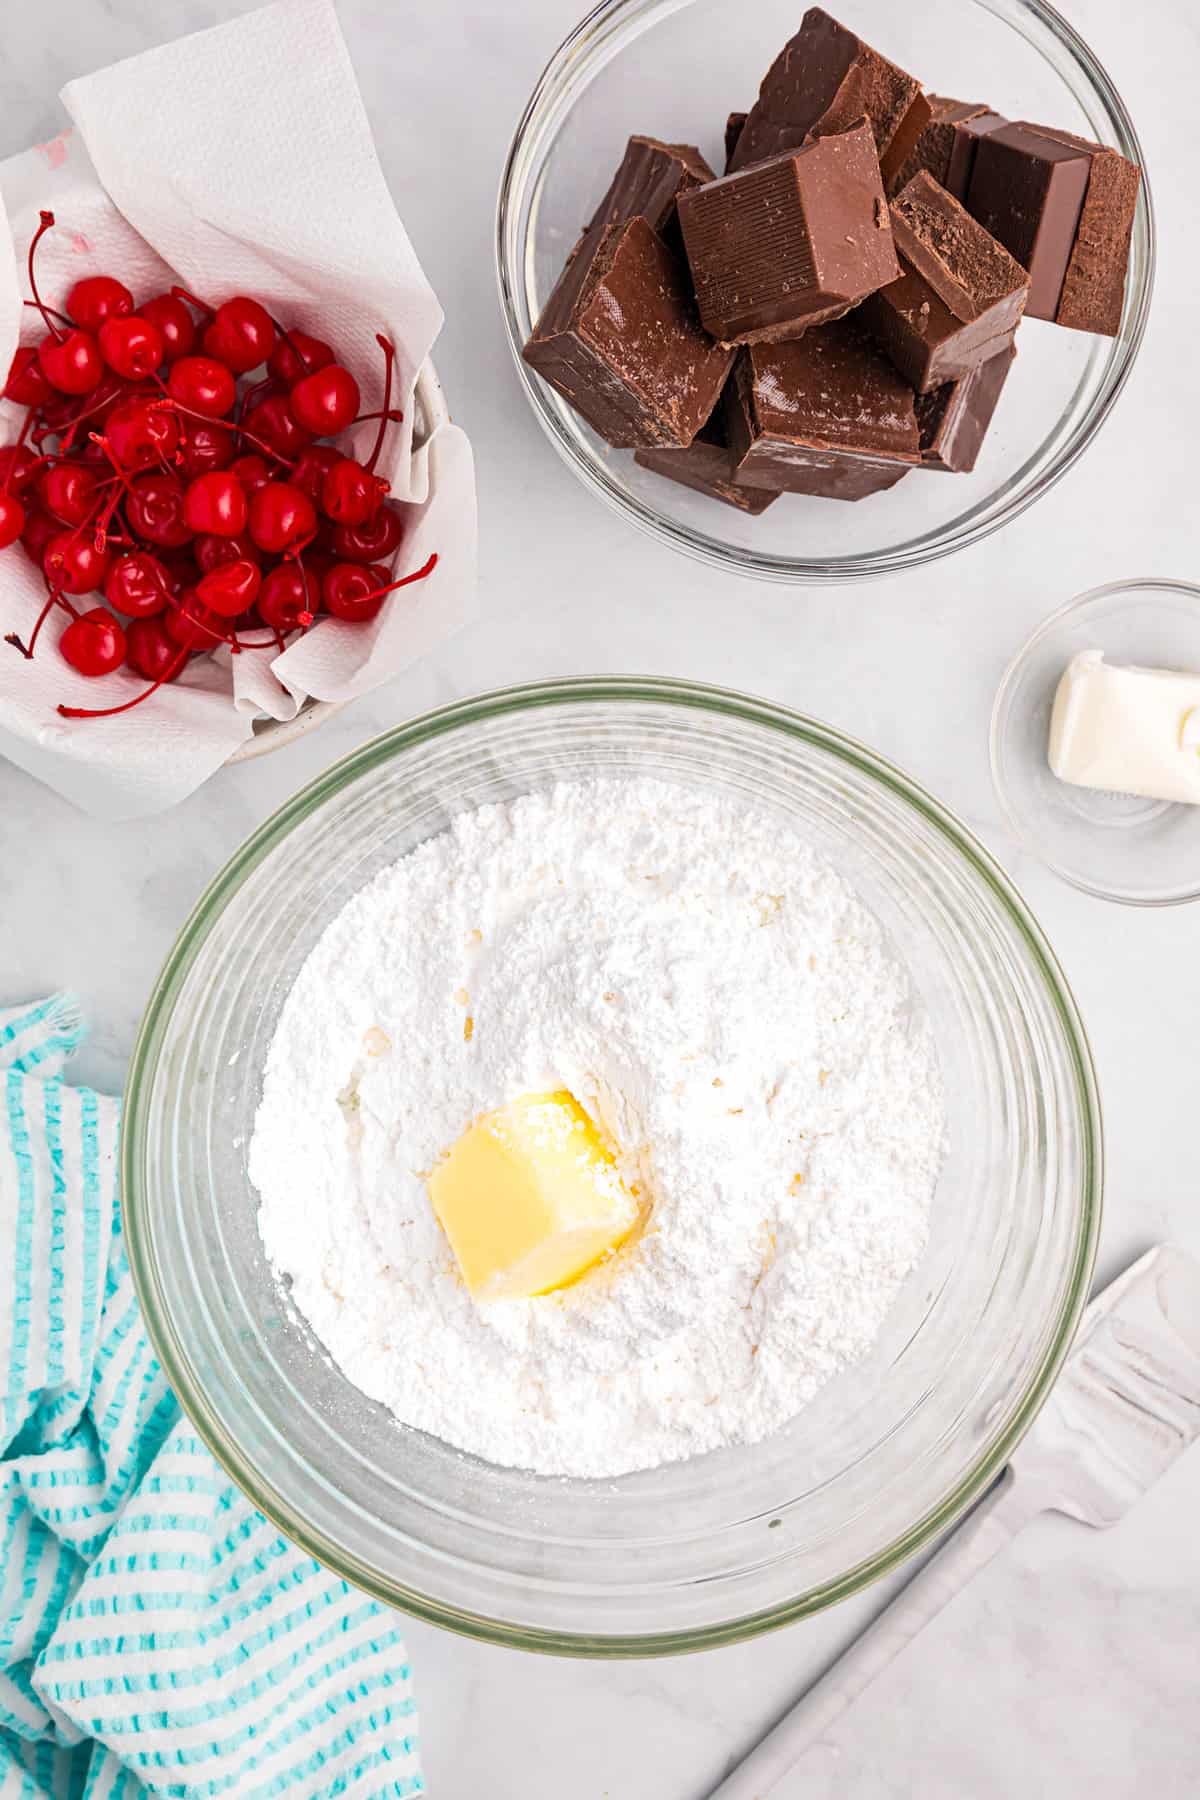 Creaming together butter and sugar in a glass mixing bowl for Chocolate Covered Cherries recipe